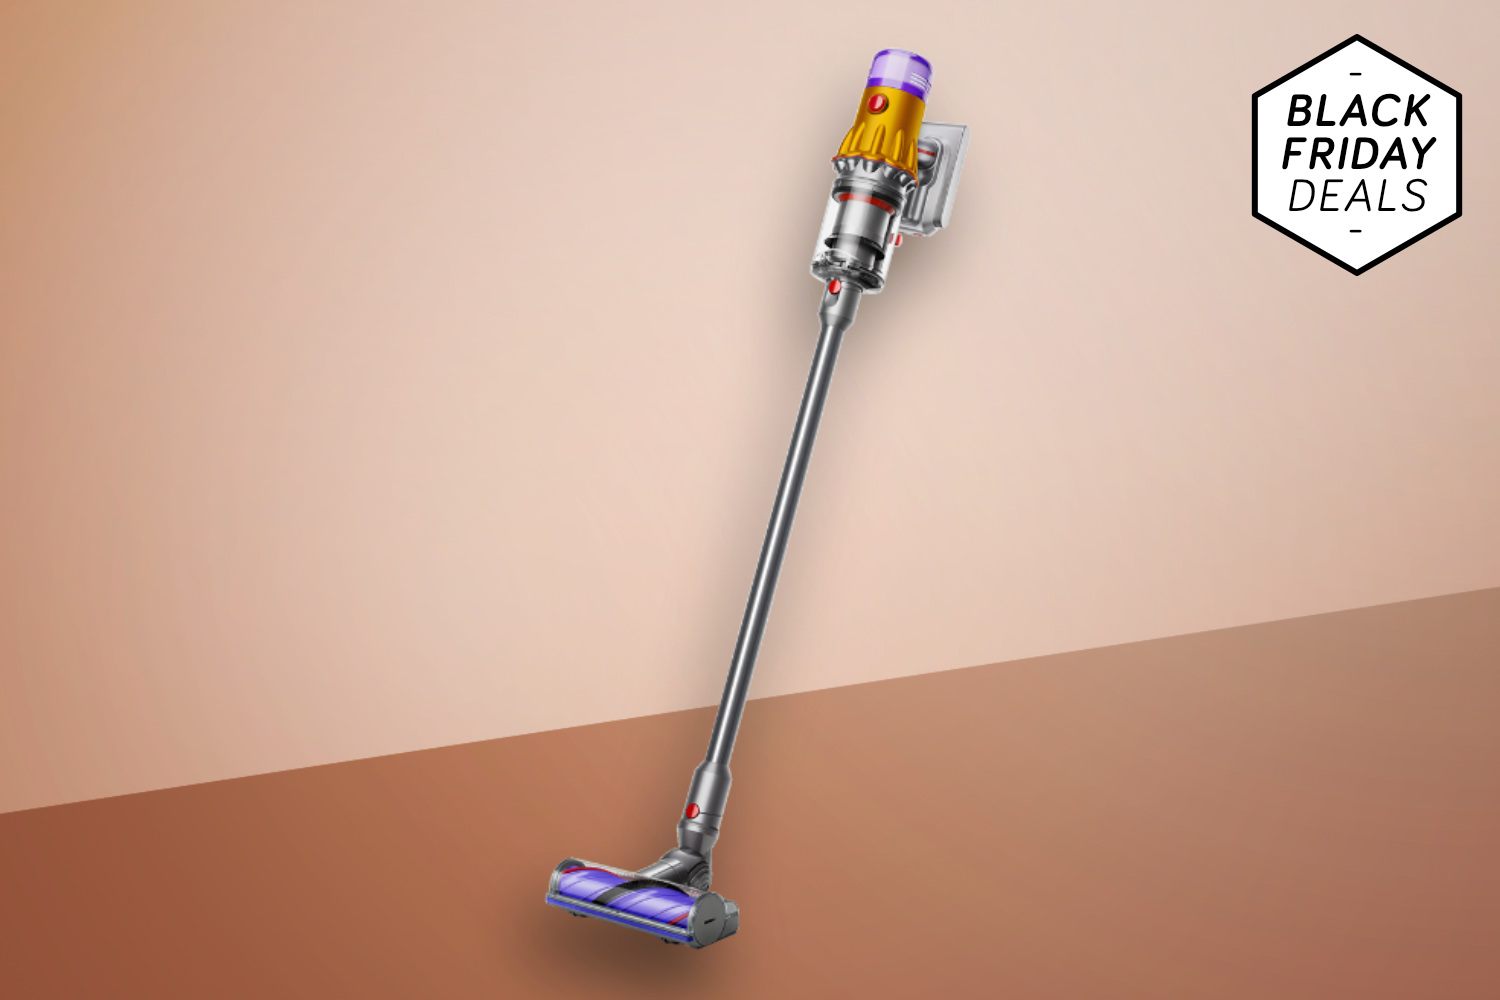 Dyson's V12 Detect Slim Absolute vacuum is £100 off ahead of Black